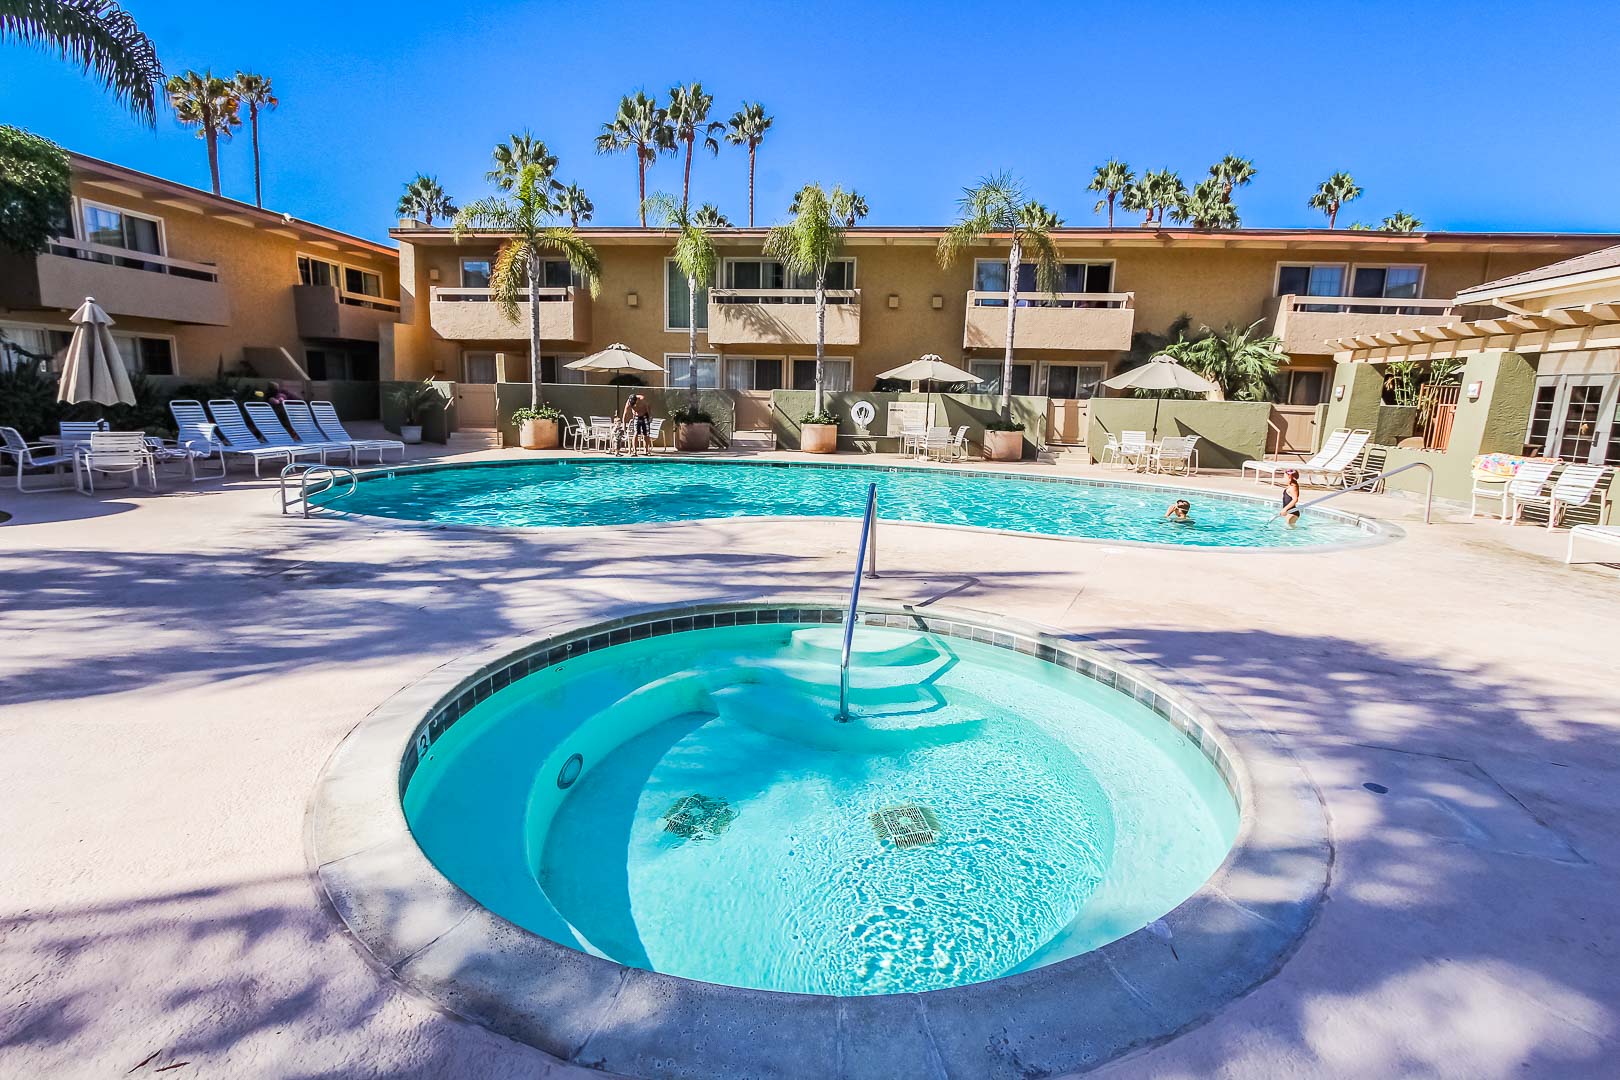 A view of the outdoor swimming pool and Jacuzzi at VRI's Winner Circle Resort in California.